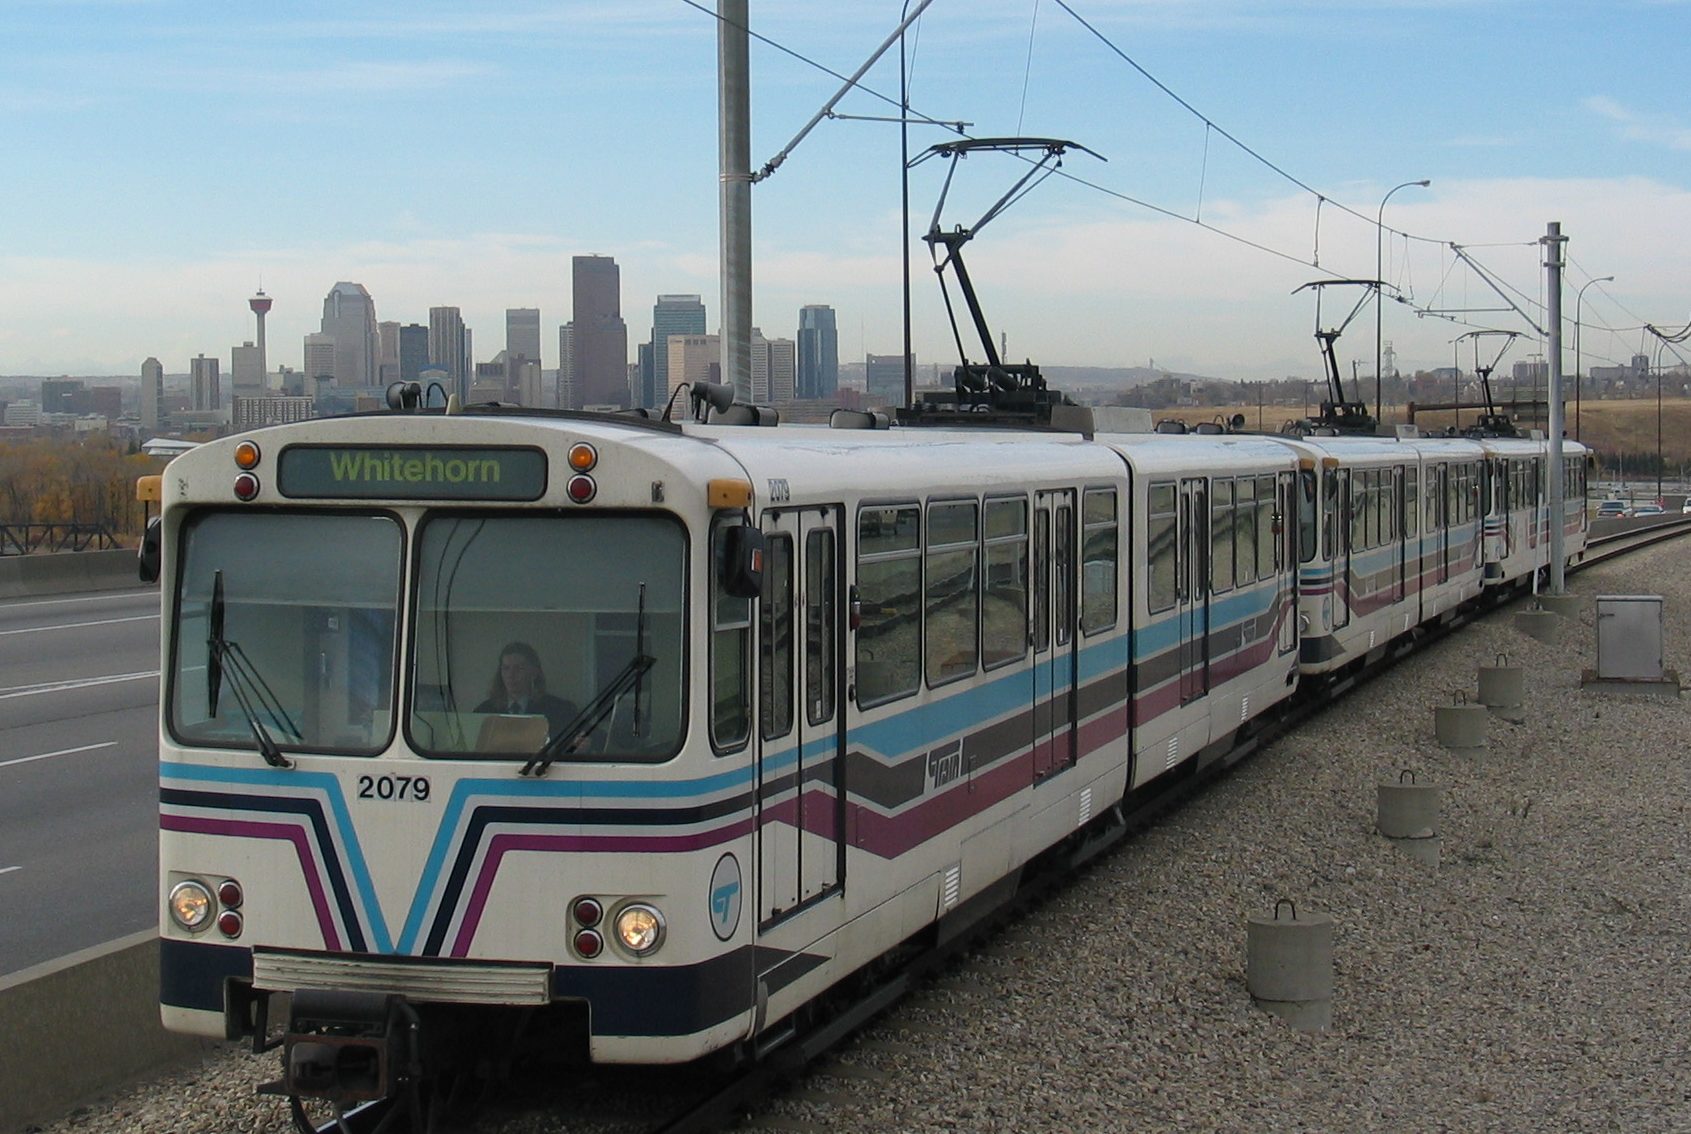 Siemens-Duewag U2 - Car 2079, Series 4 operating with the Calgary downtown skyline in the background.